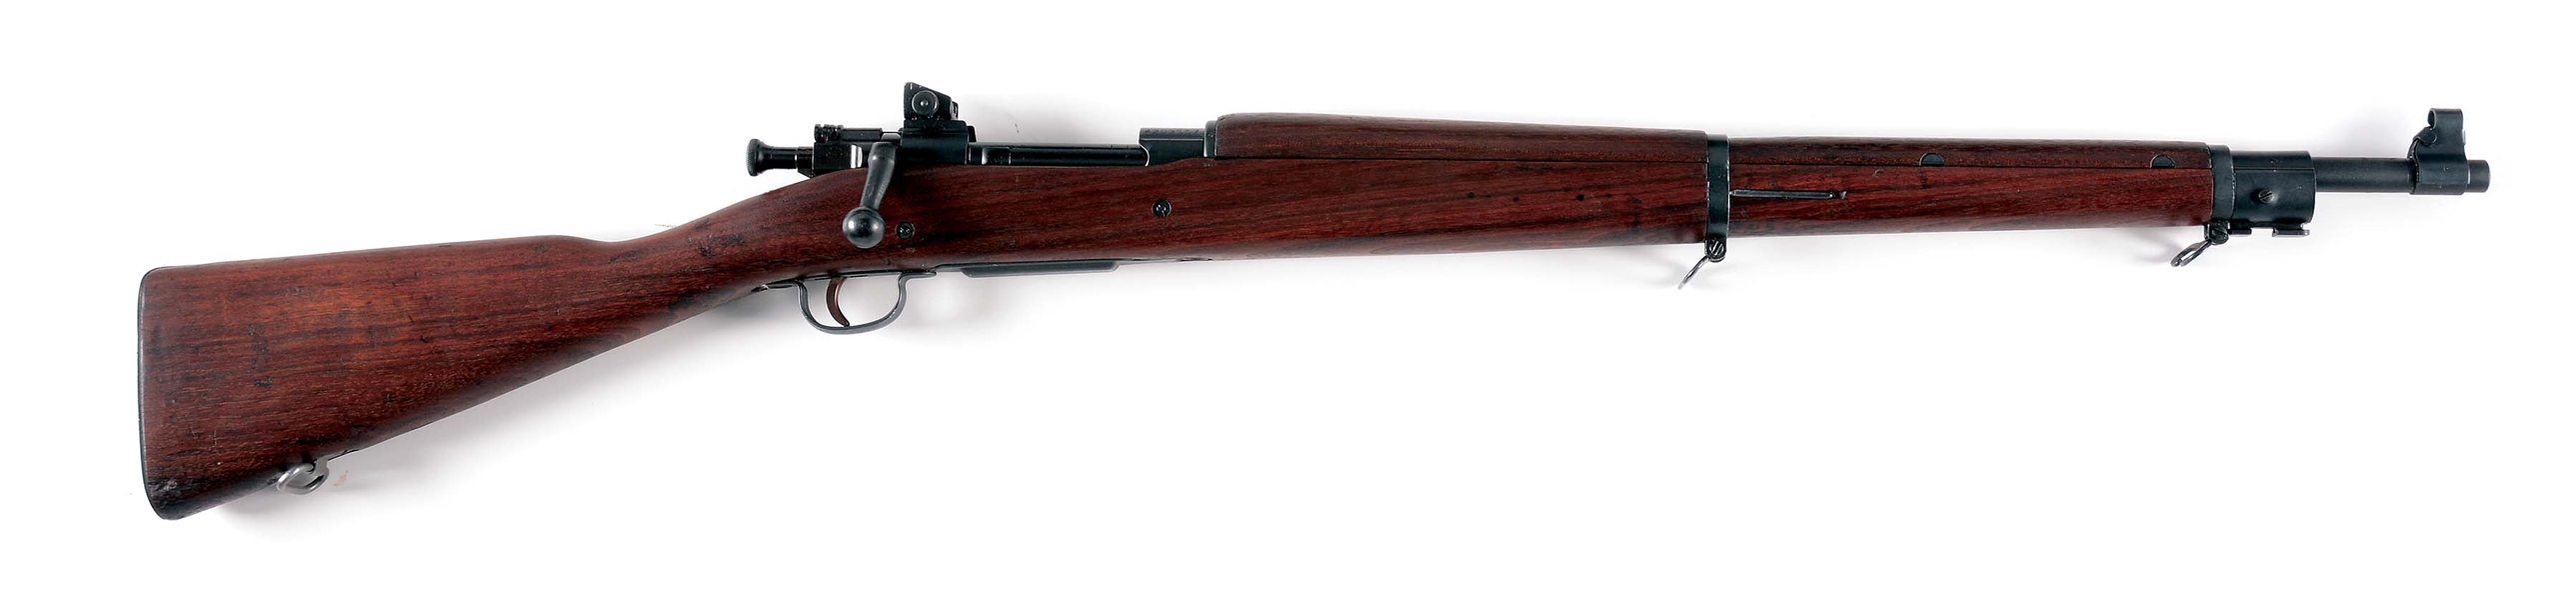 (C) REMINGTON MODEL 03-A3 GREEK ISSUED BOLT ACTION RIFLE.